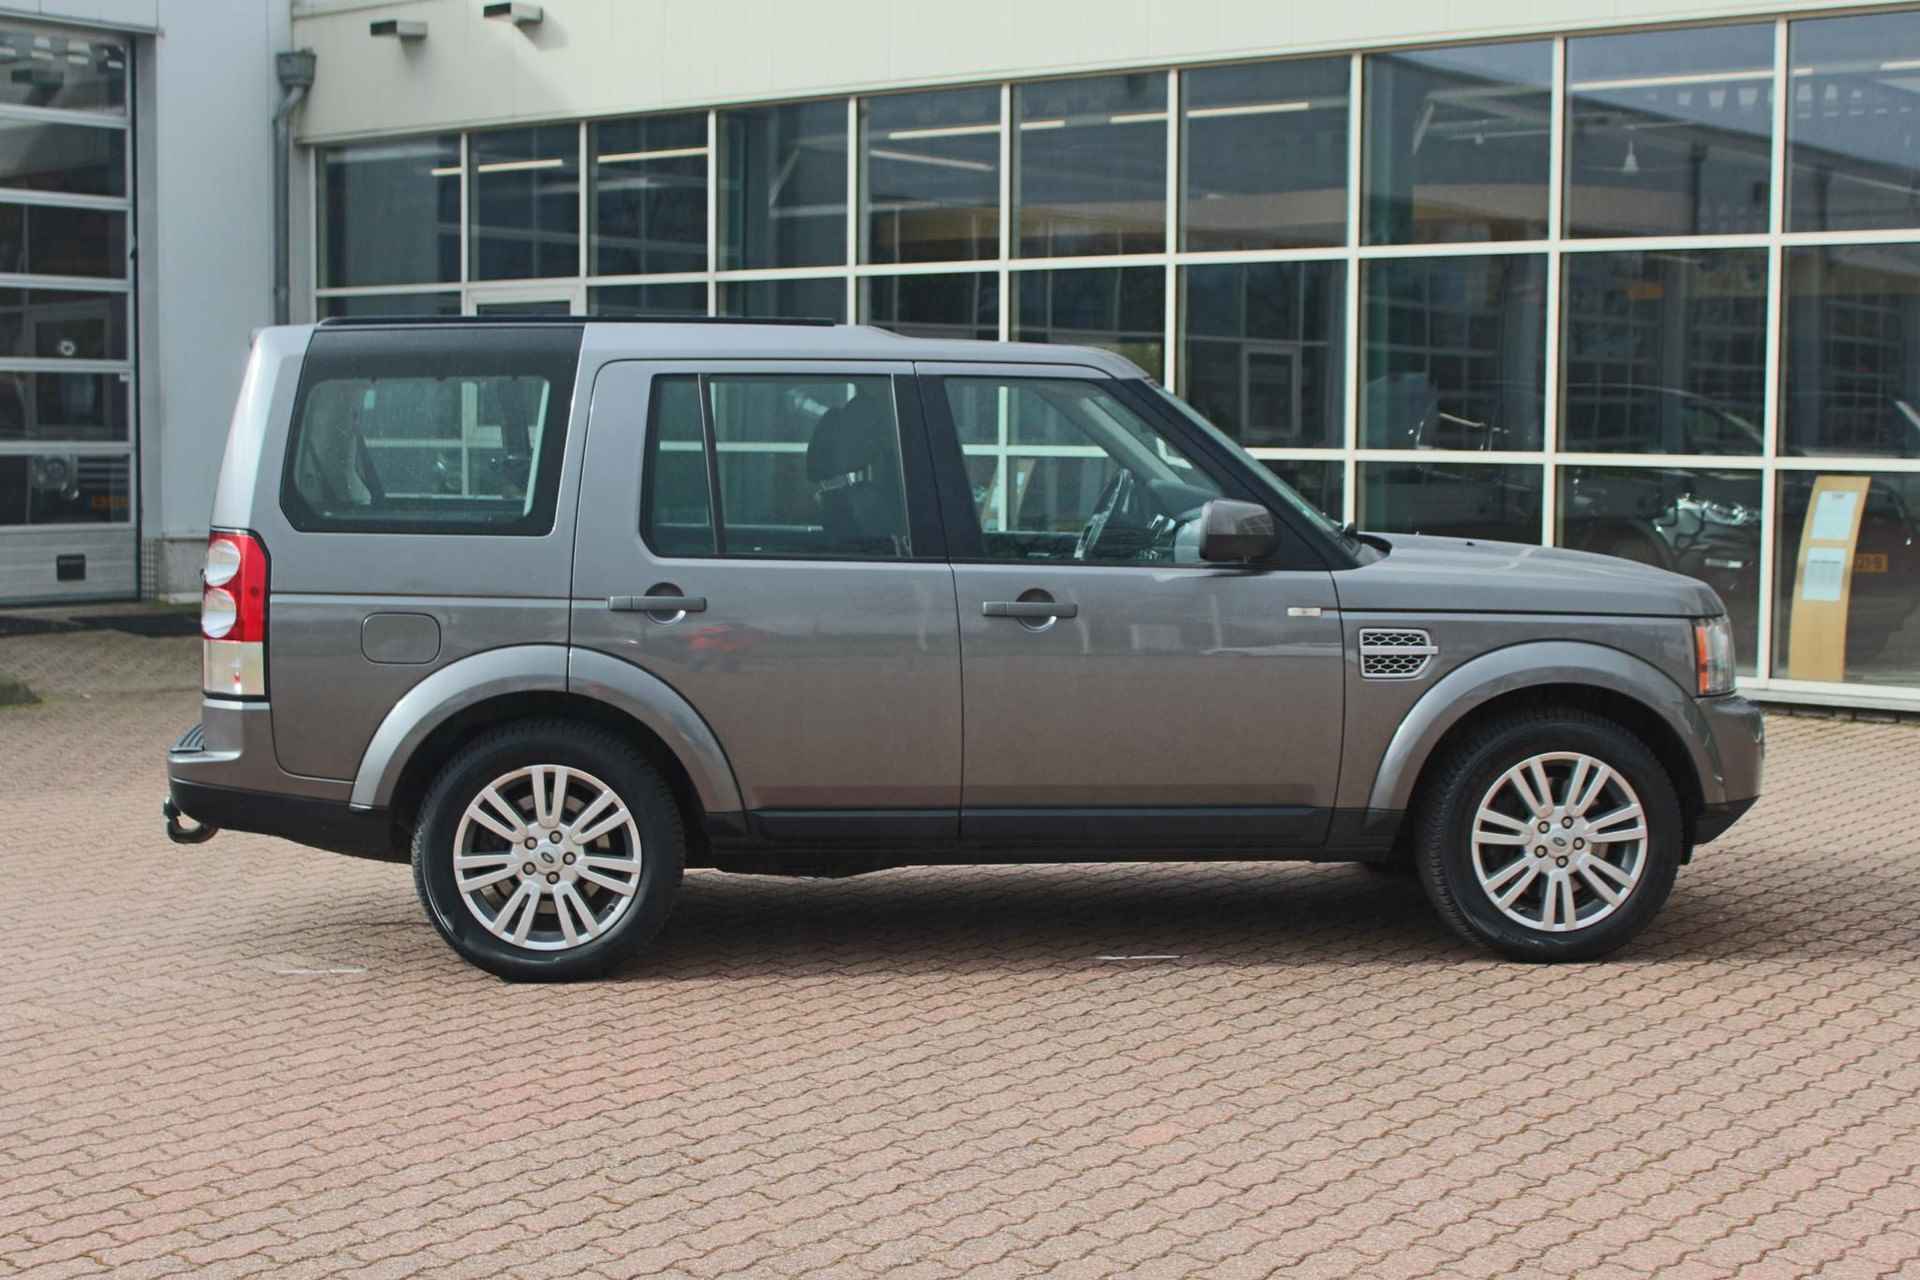 Land Rover Discovery 3.0 SDV6 HSE 7 -Seater - 10/44